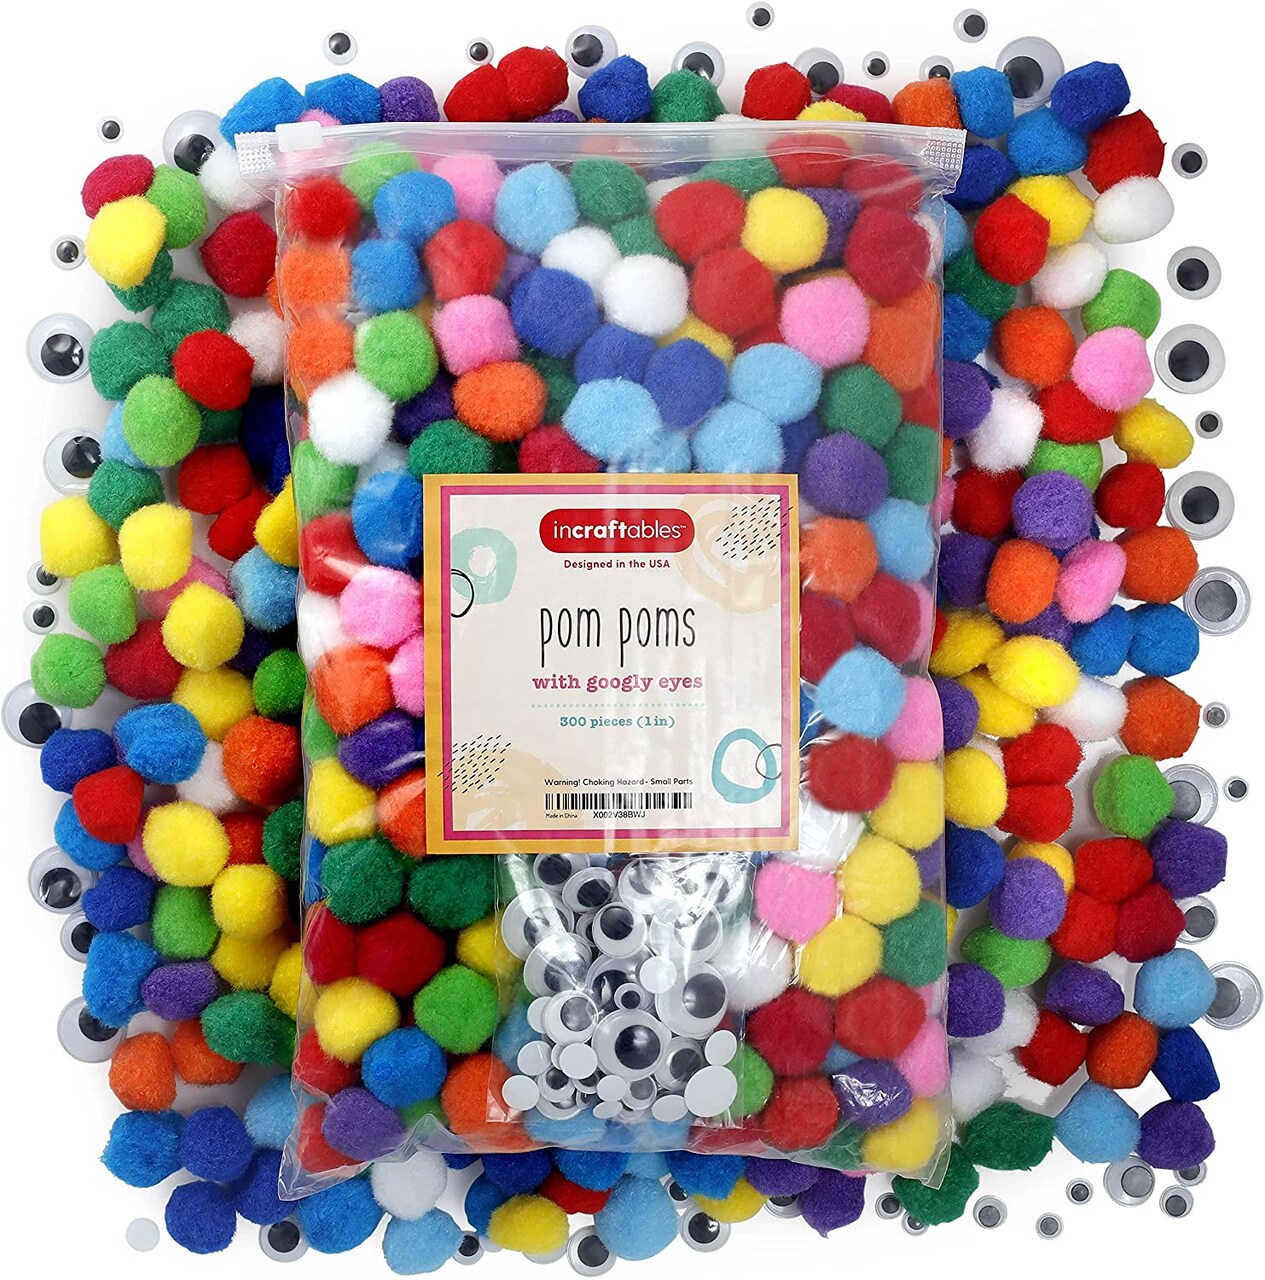 Incraftables 300 pcs Pom Poms with Googly Eyes. Best Colored Cotton 1 inch  Puff Balls Pompom for DIY Crafts, Hats, Arts and Decorations. Multicolor  Puffy Pompoms Gift Set for Kids & Adults